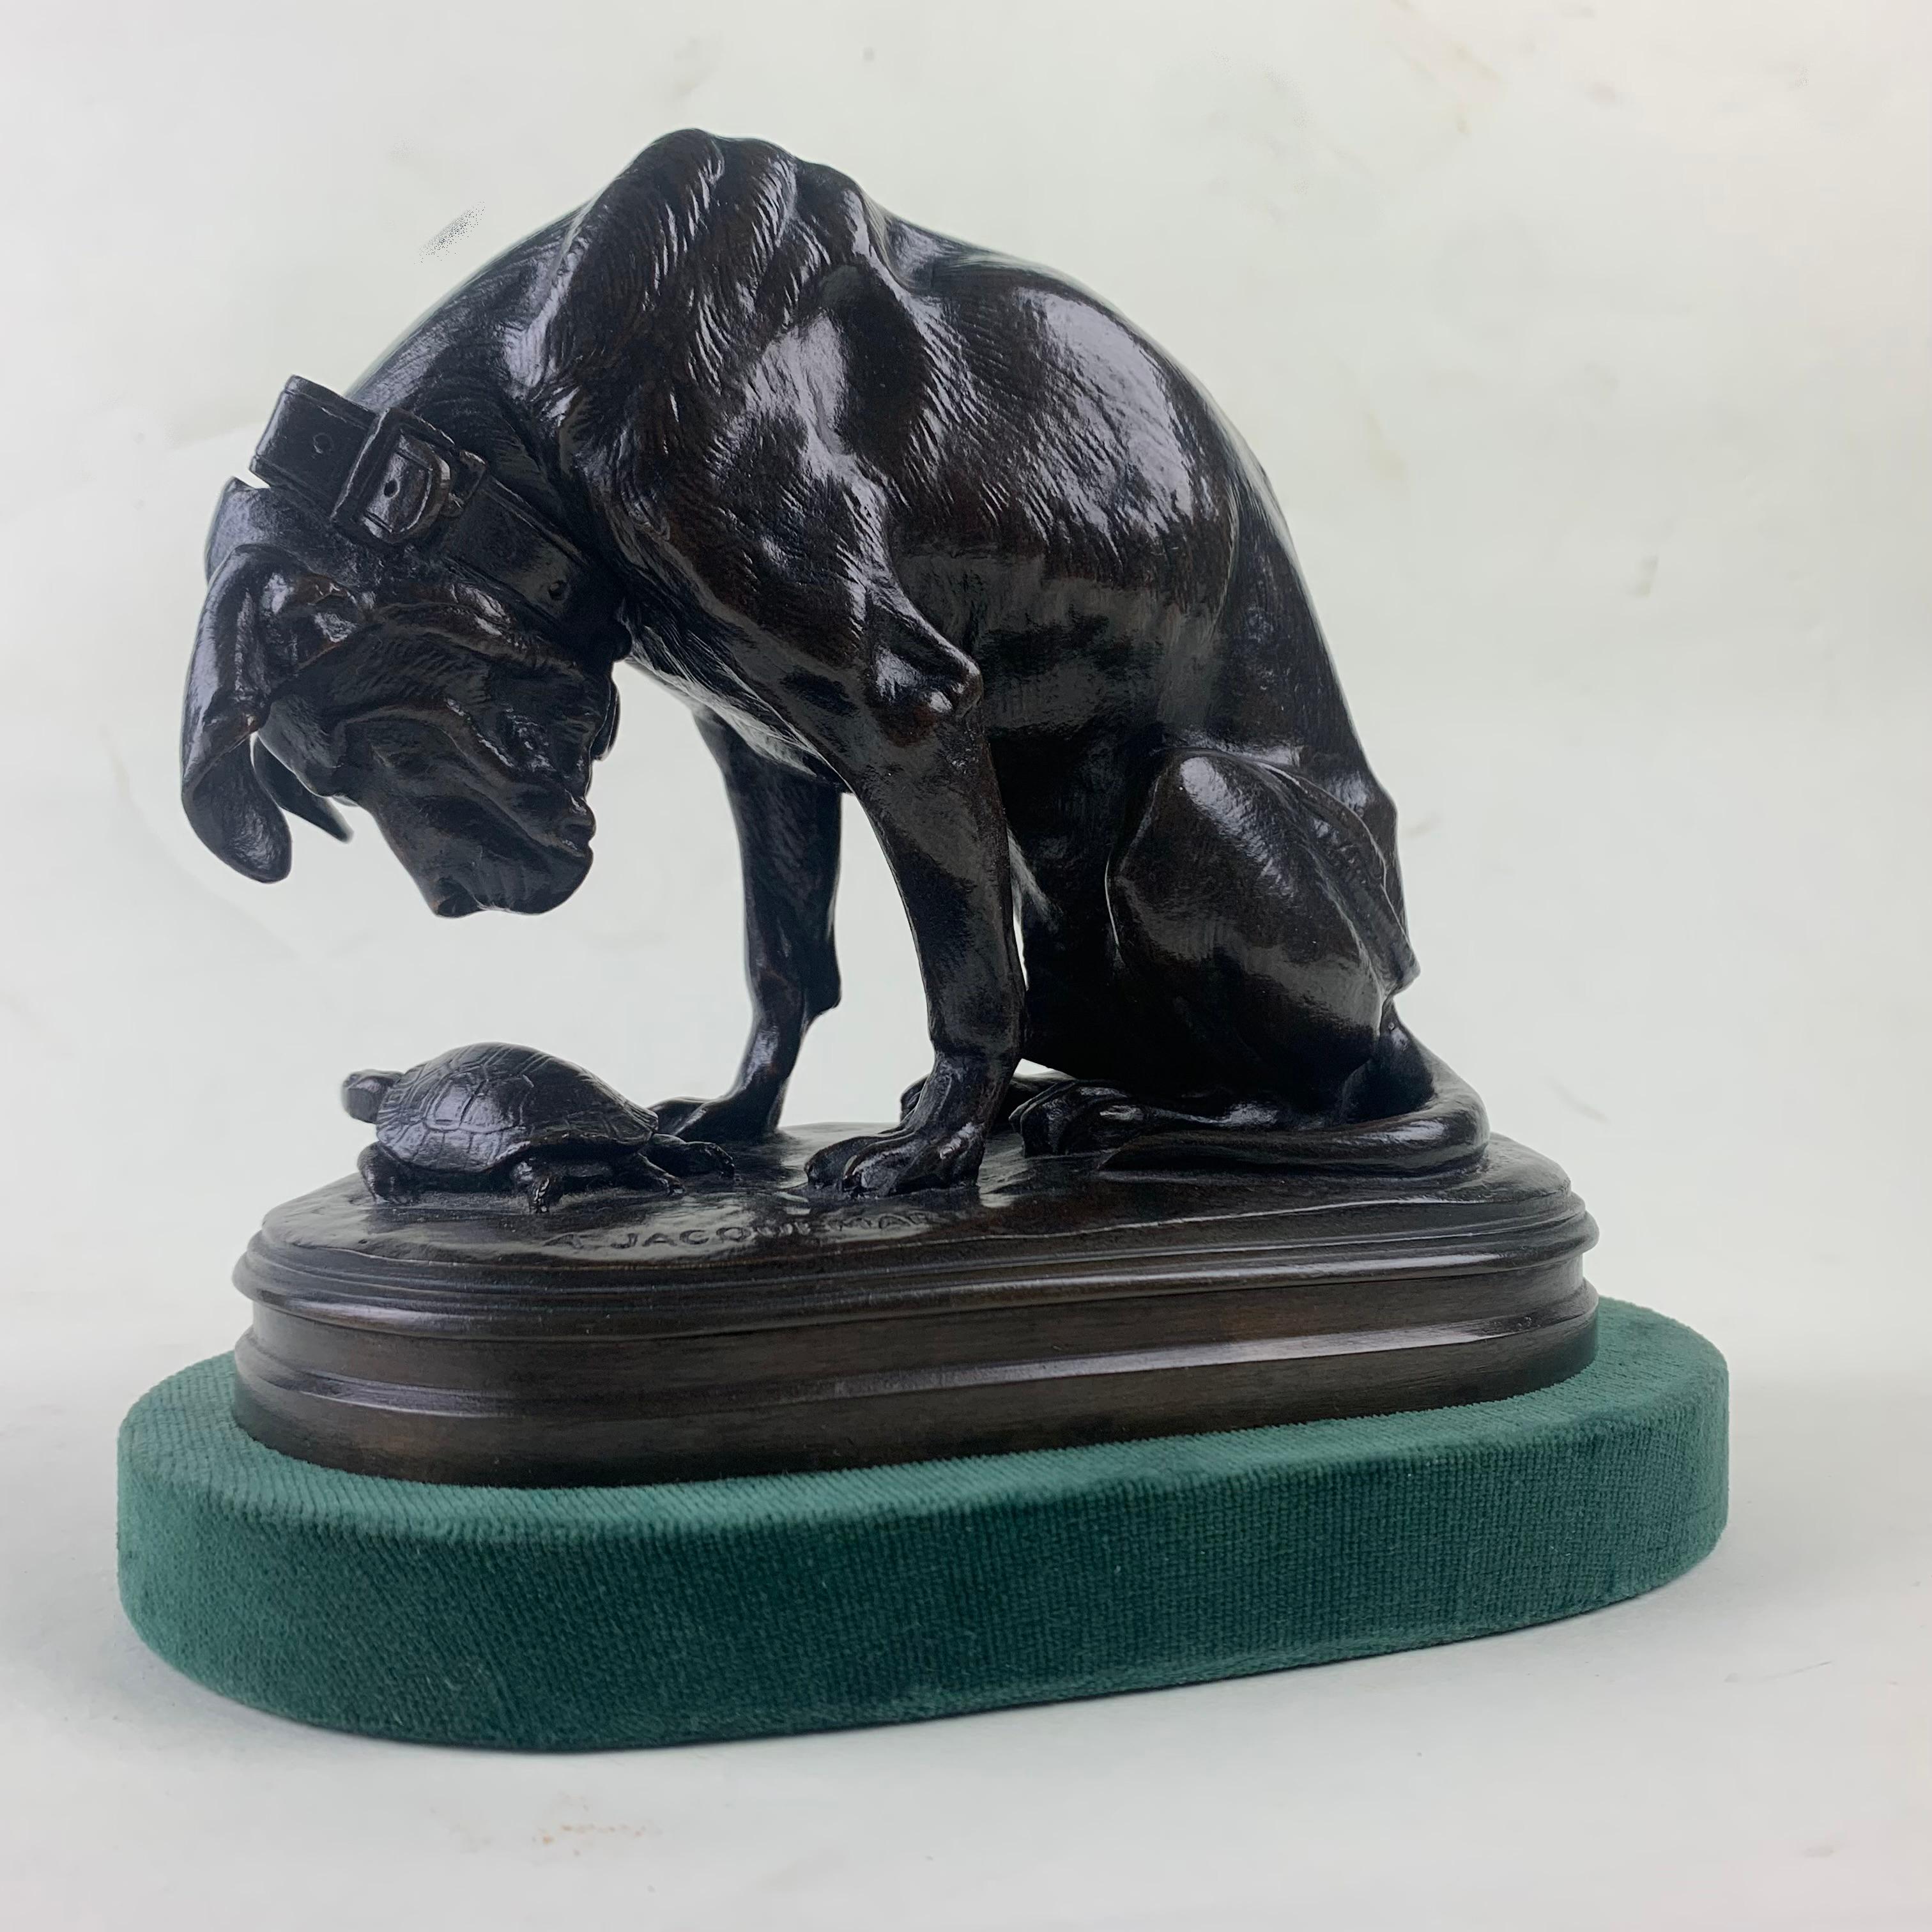 French bronze figure of a dog and a tortoise by Alfred Jaquemont, signed to the base and stamped A.D. for the A. Delafontaine foundry. With excellent deep brown and rich patination.
Provenance:with Hickmott Fine Arts, London.